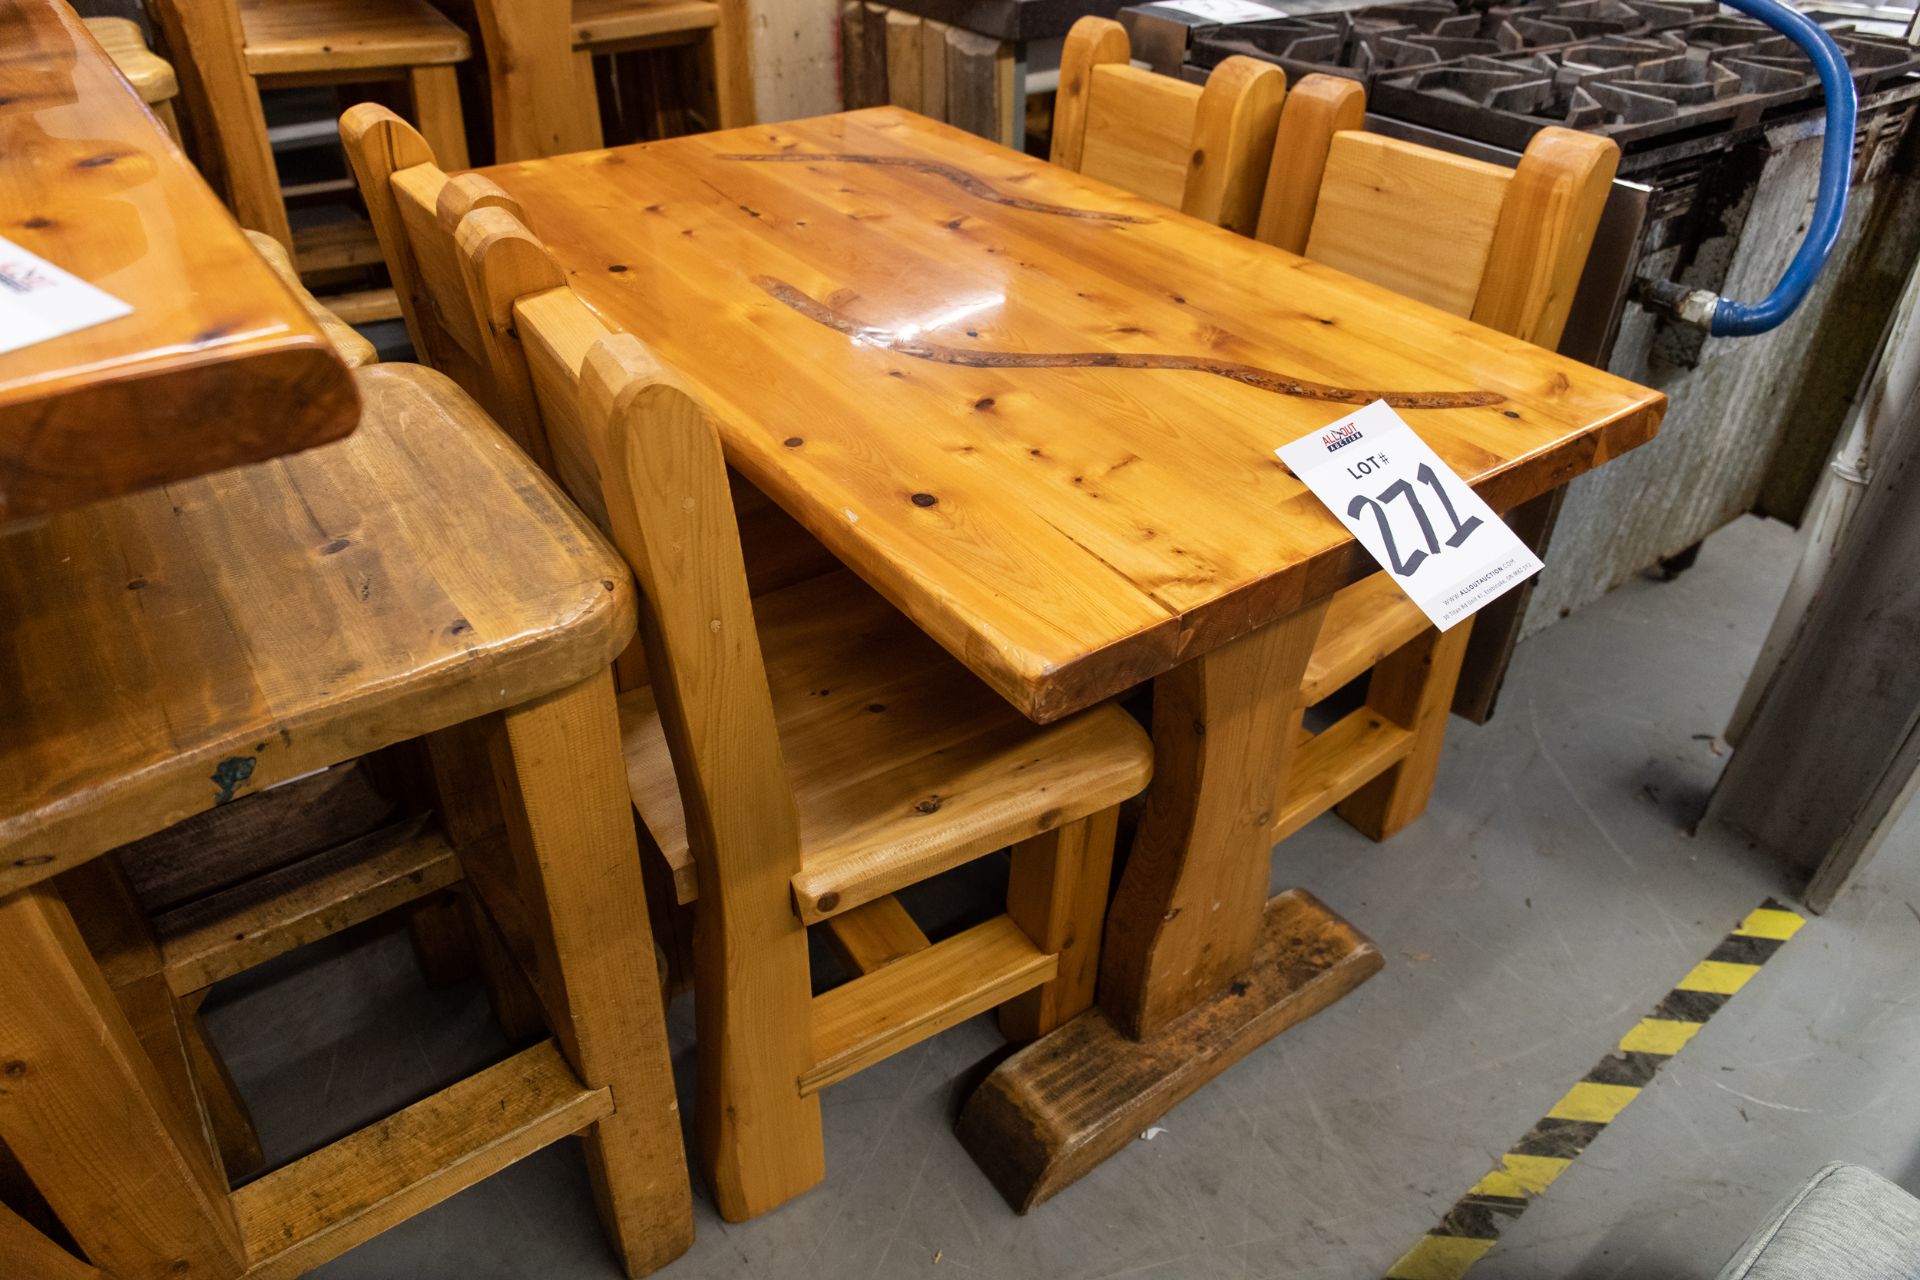 4' WHITE PINE DINING TABLE WITH 4 CHAIRS L-48" W-28" H-30" - Image 2 of 2